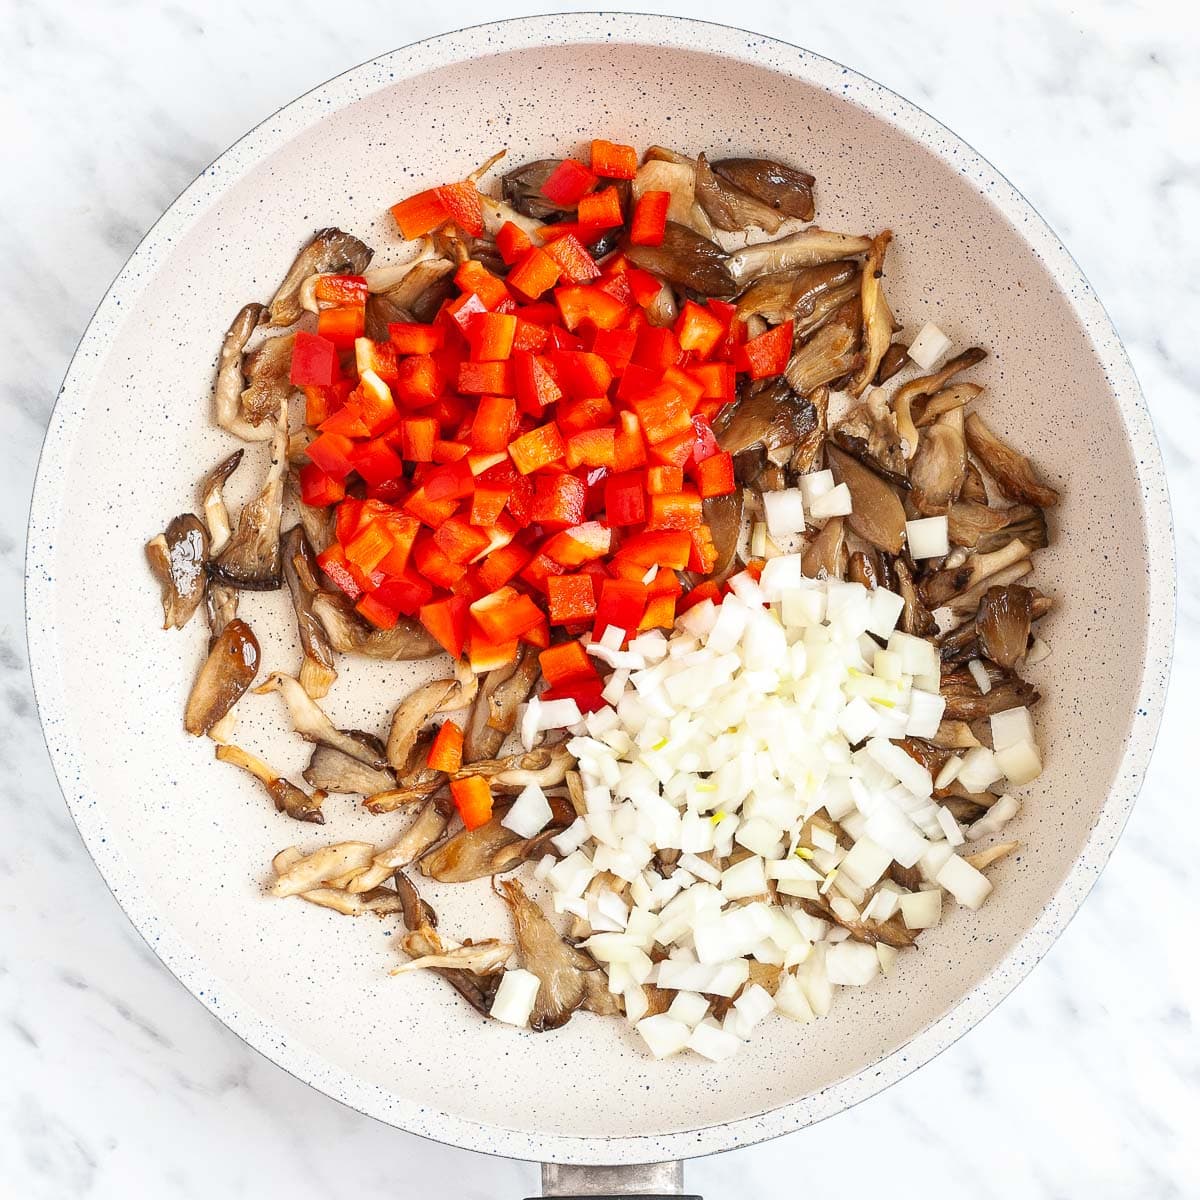 Brown mushroom shreds, chopped onion and chopped red pepper in a white frying pan